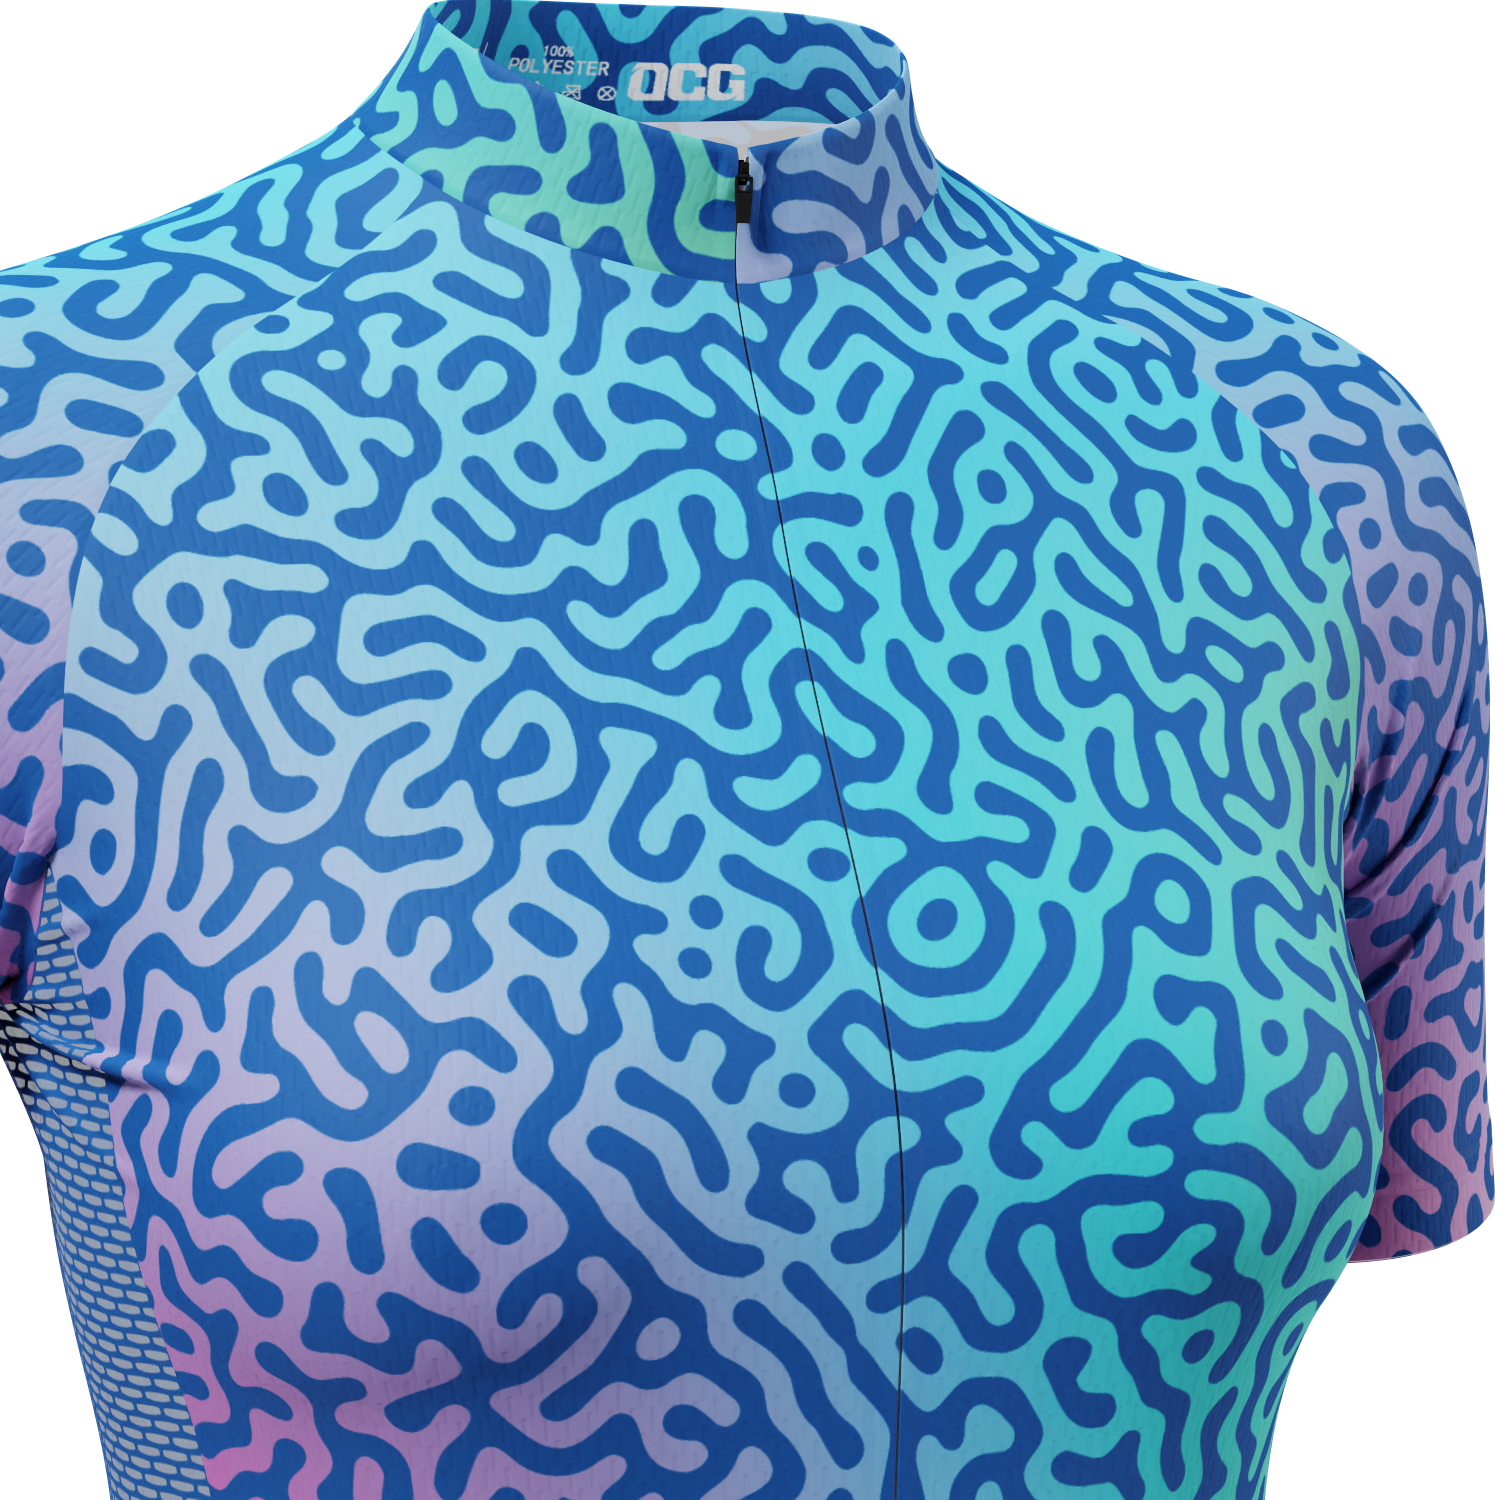 Women's Holographic Organic Lines Short Sleeve Cycling Jersey